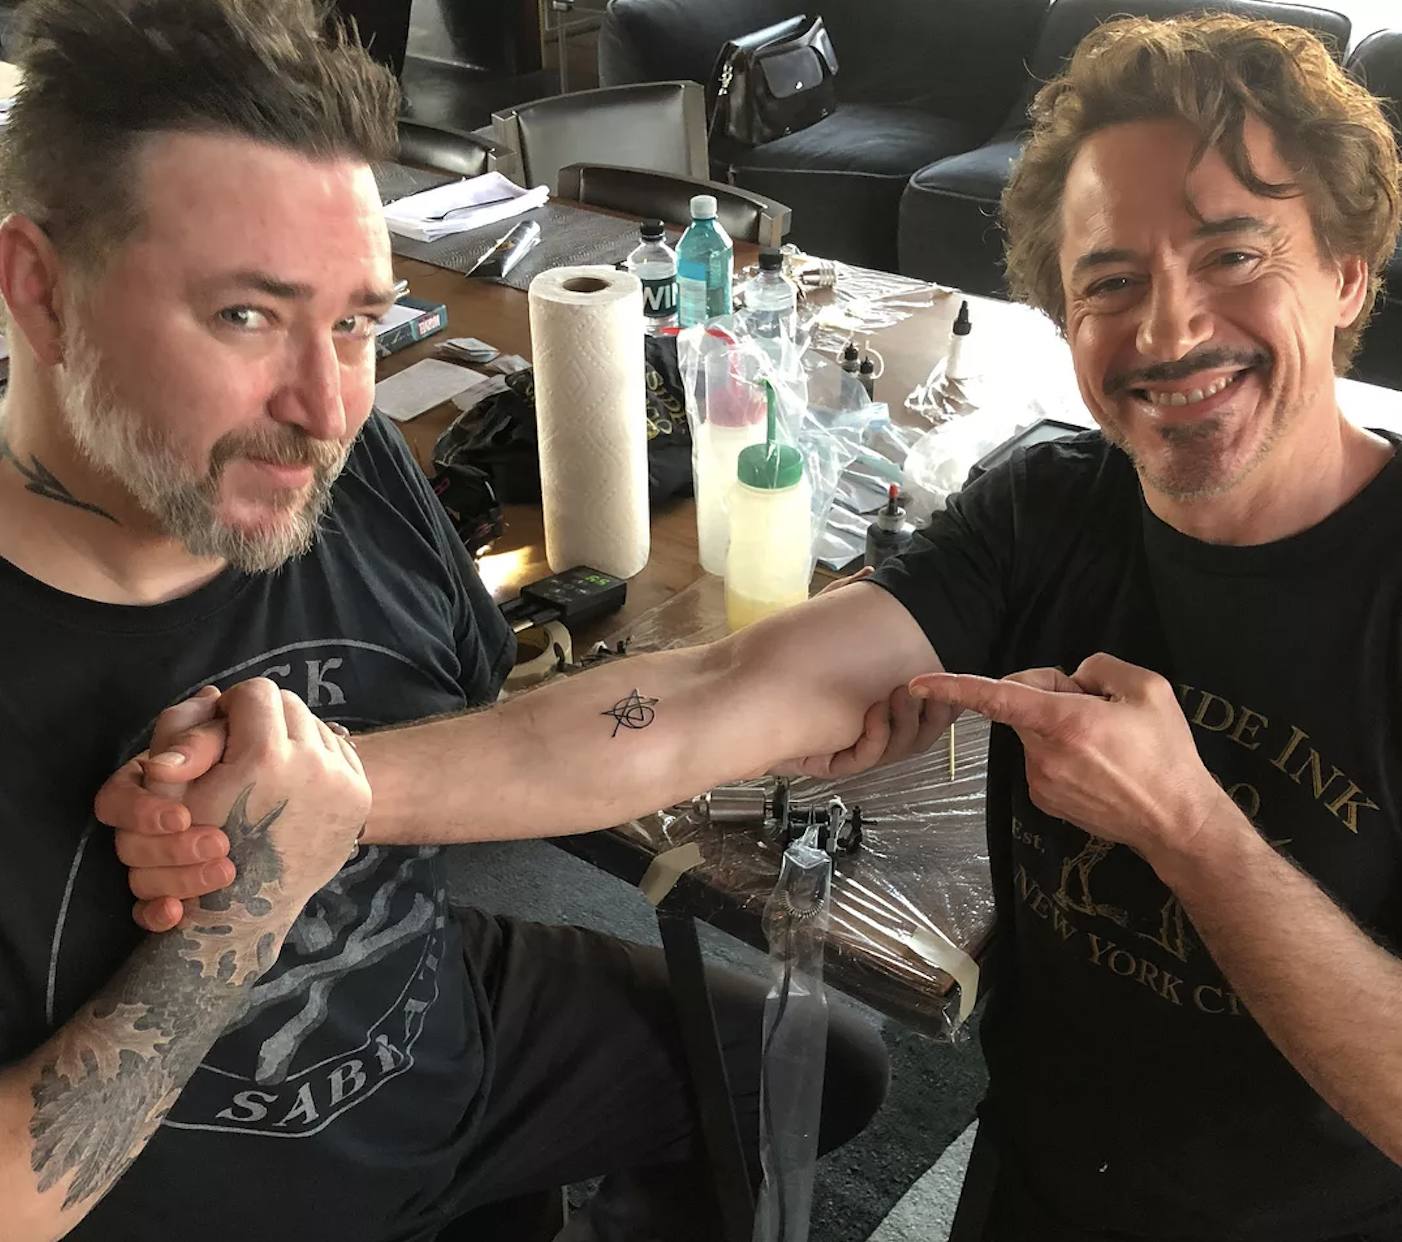 Robert Downey Jr. showing off his tattoo